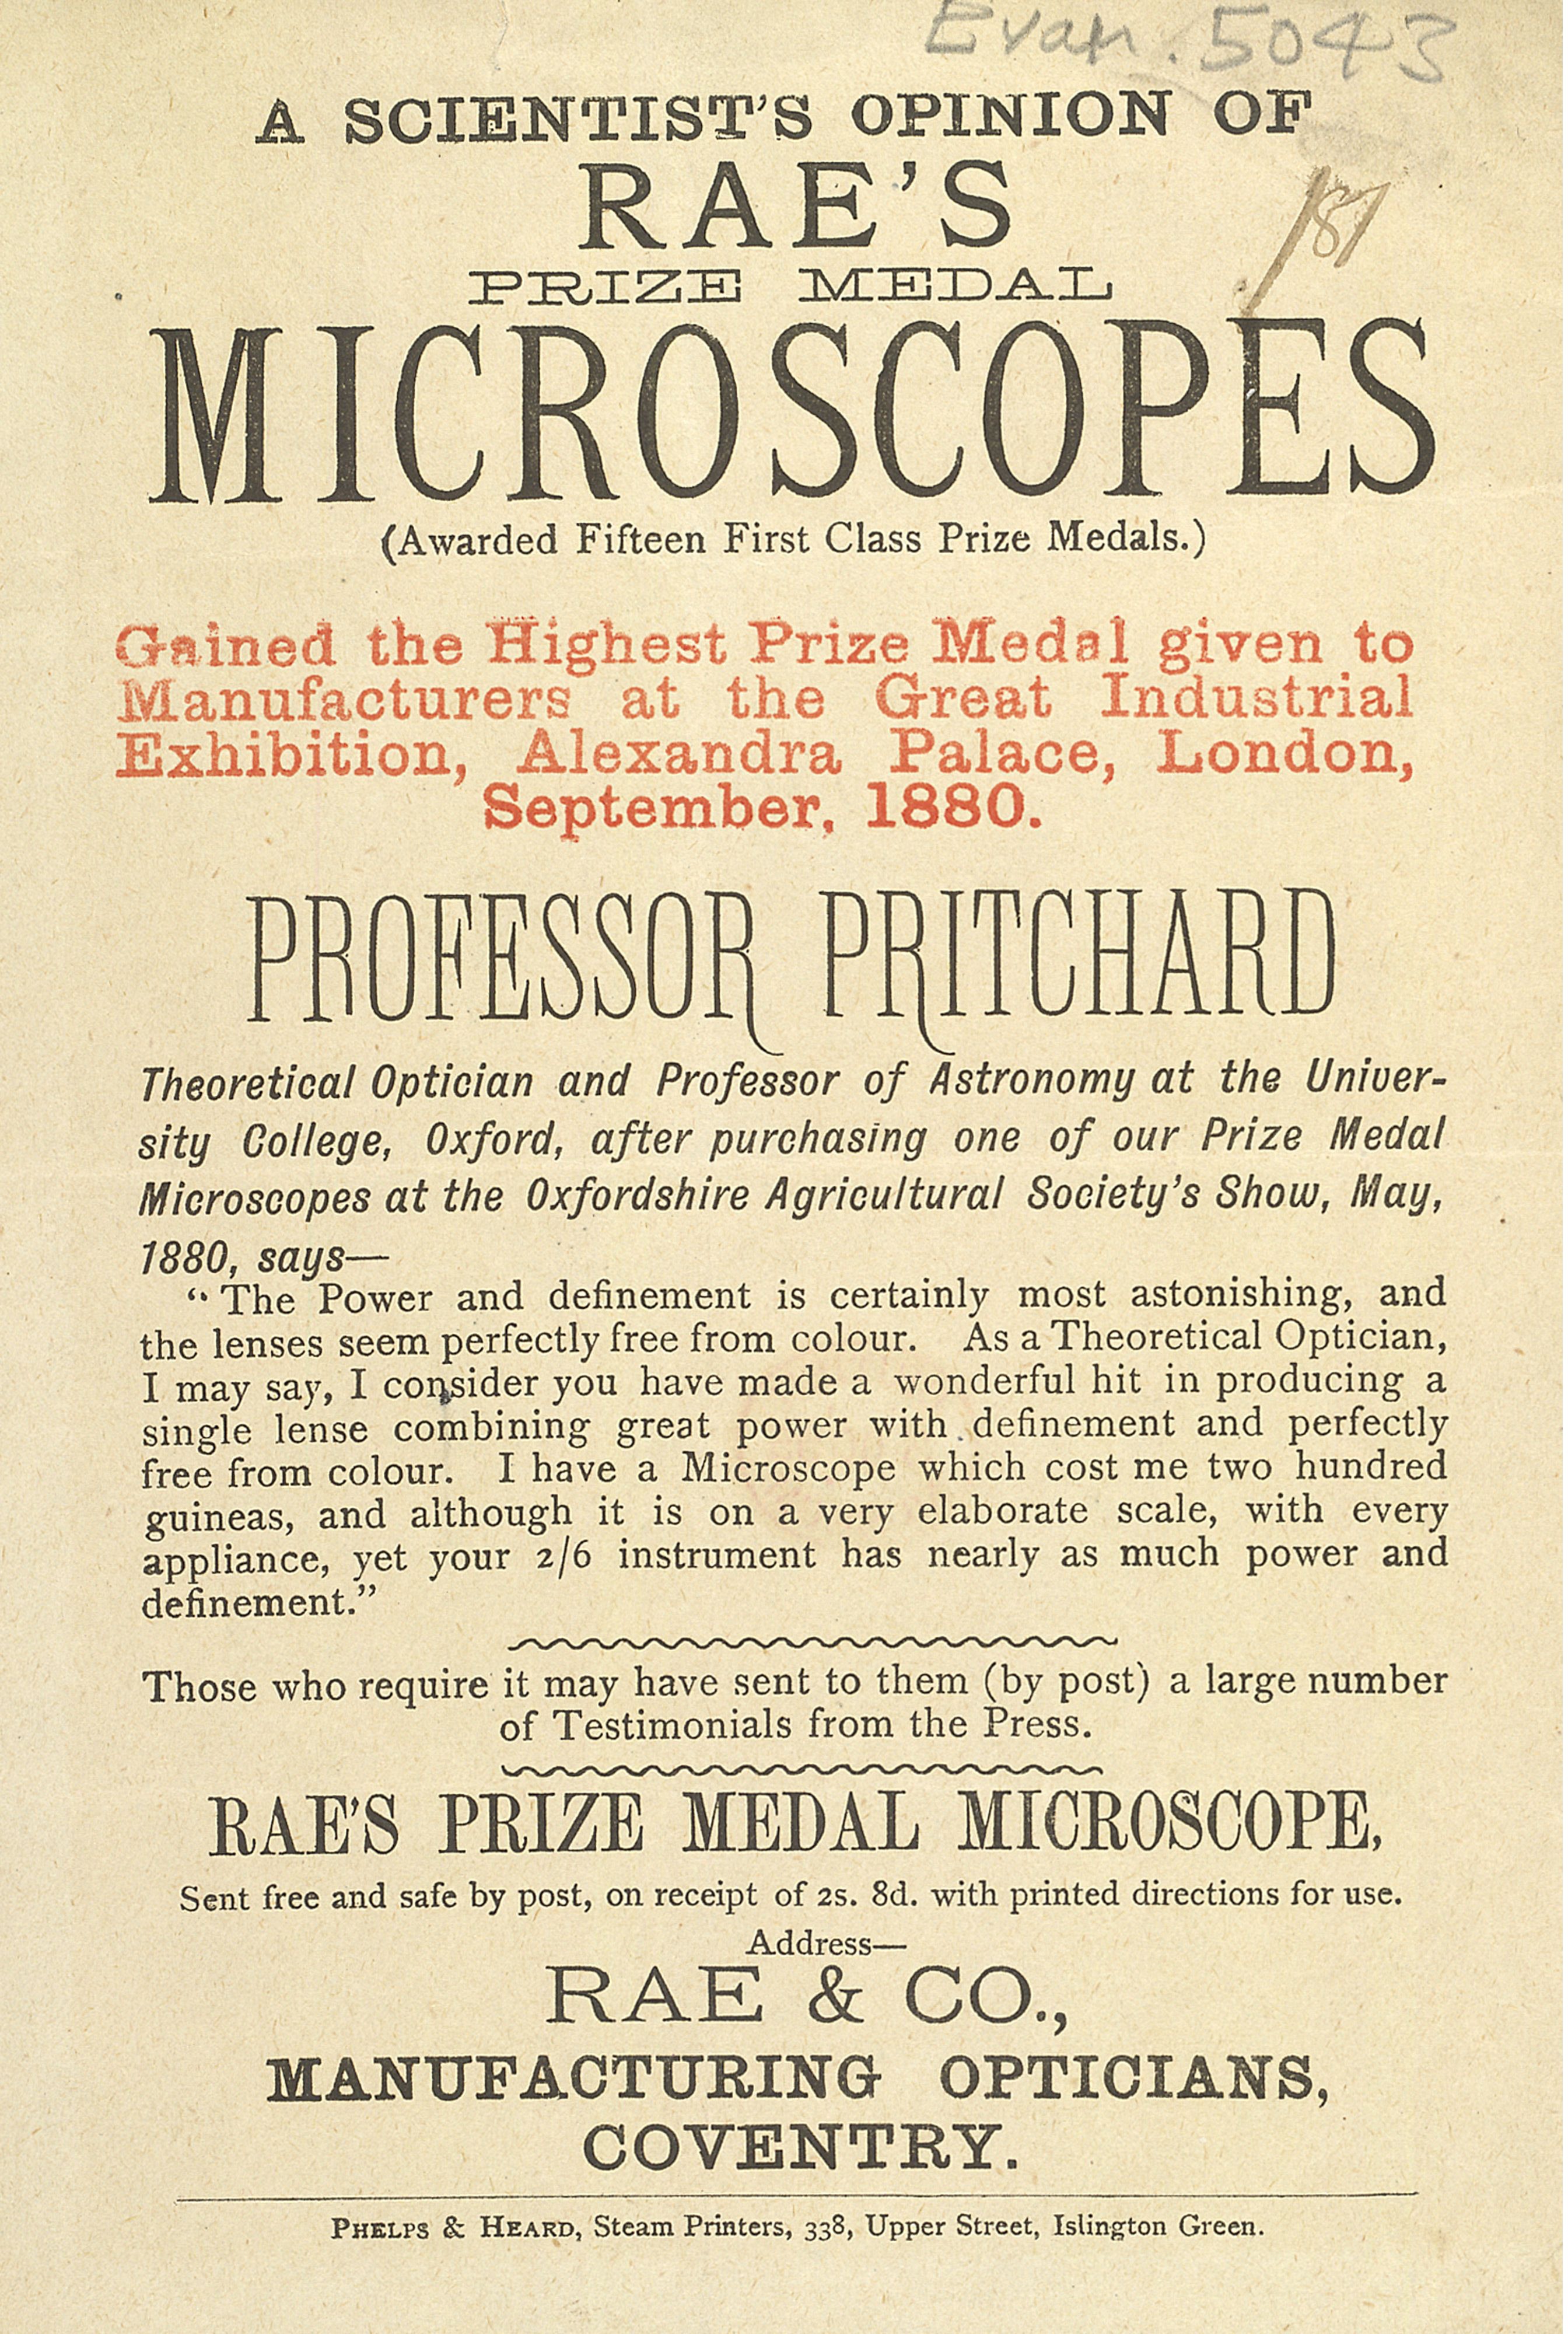 Advert for Rae's Microscopes, 1880